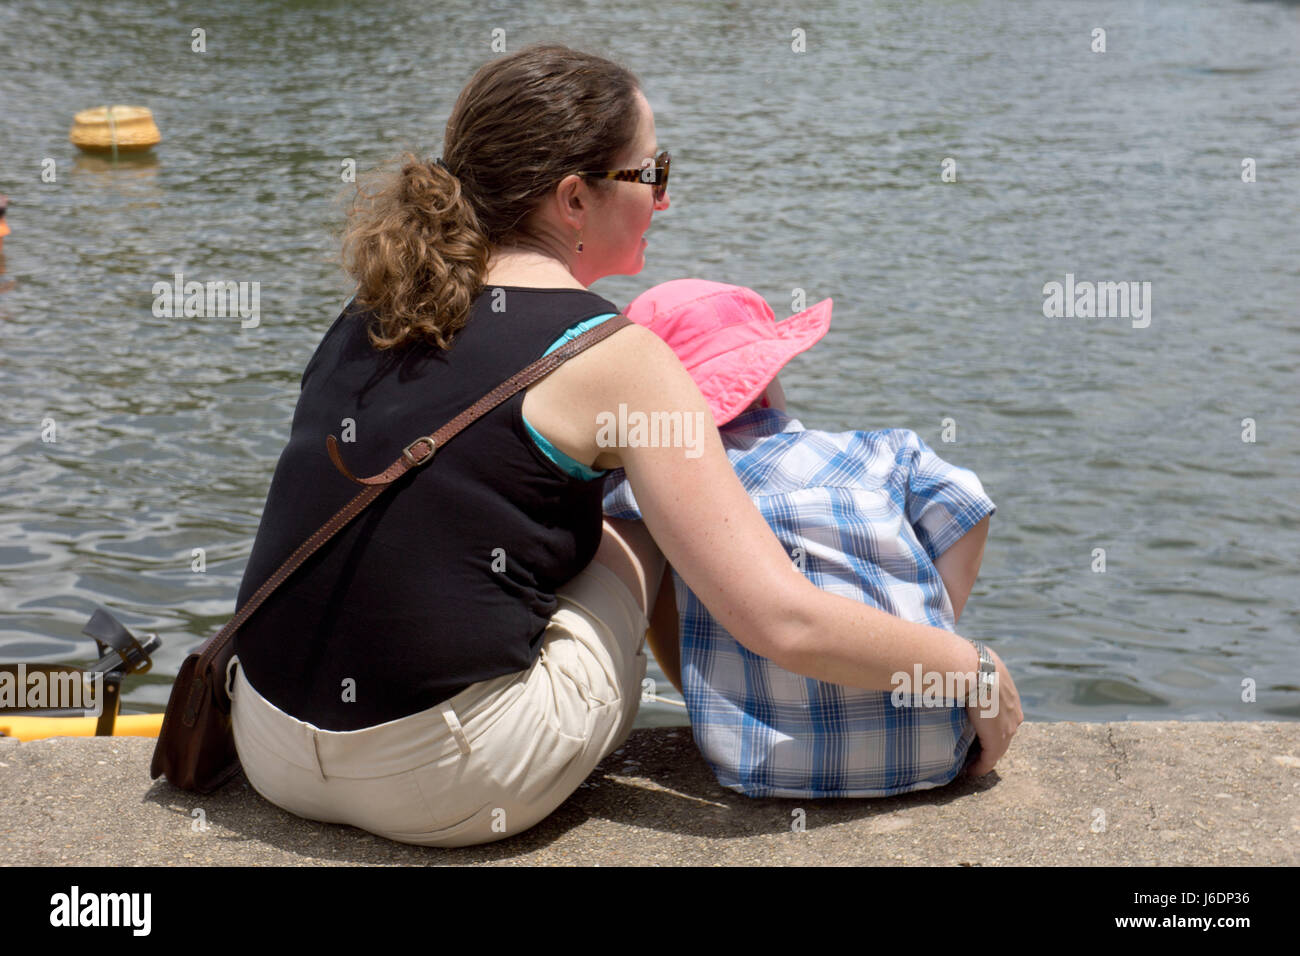 Mother and young son enjoying time together at the lake. Stock Photo